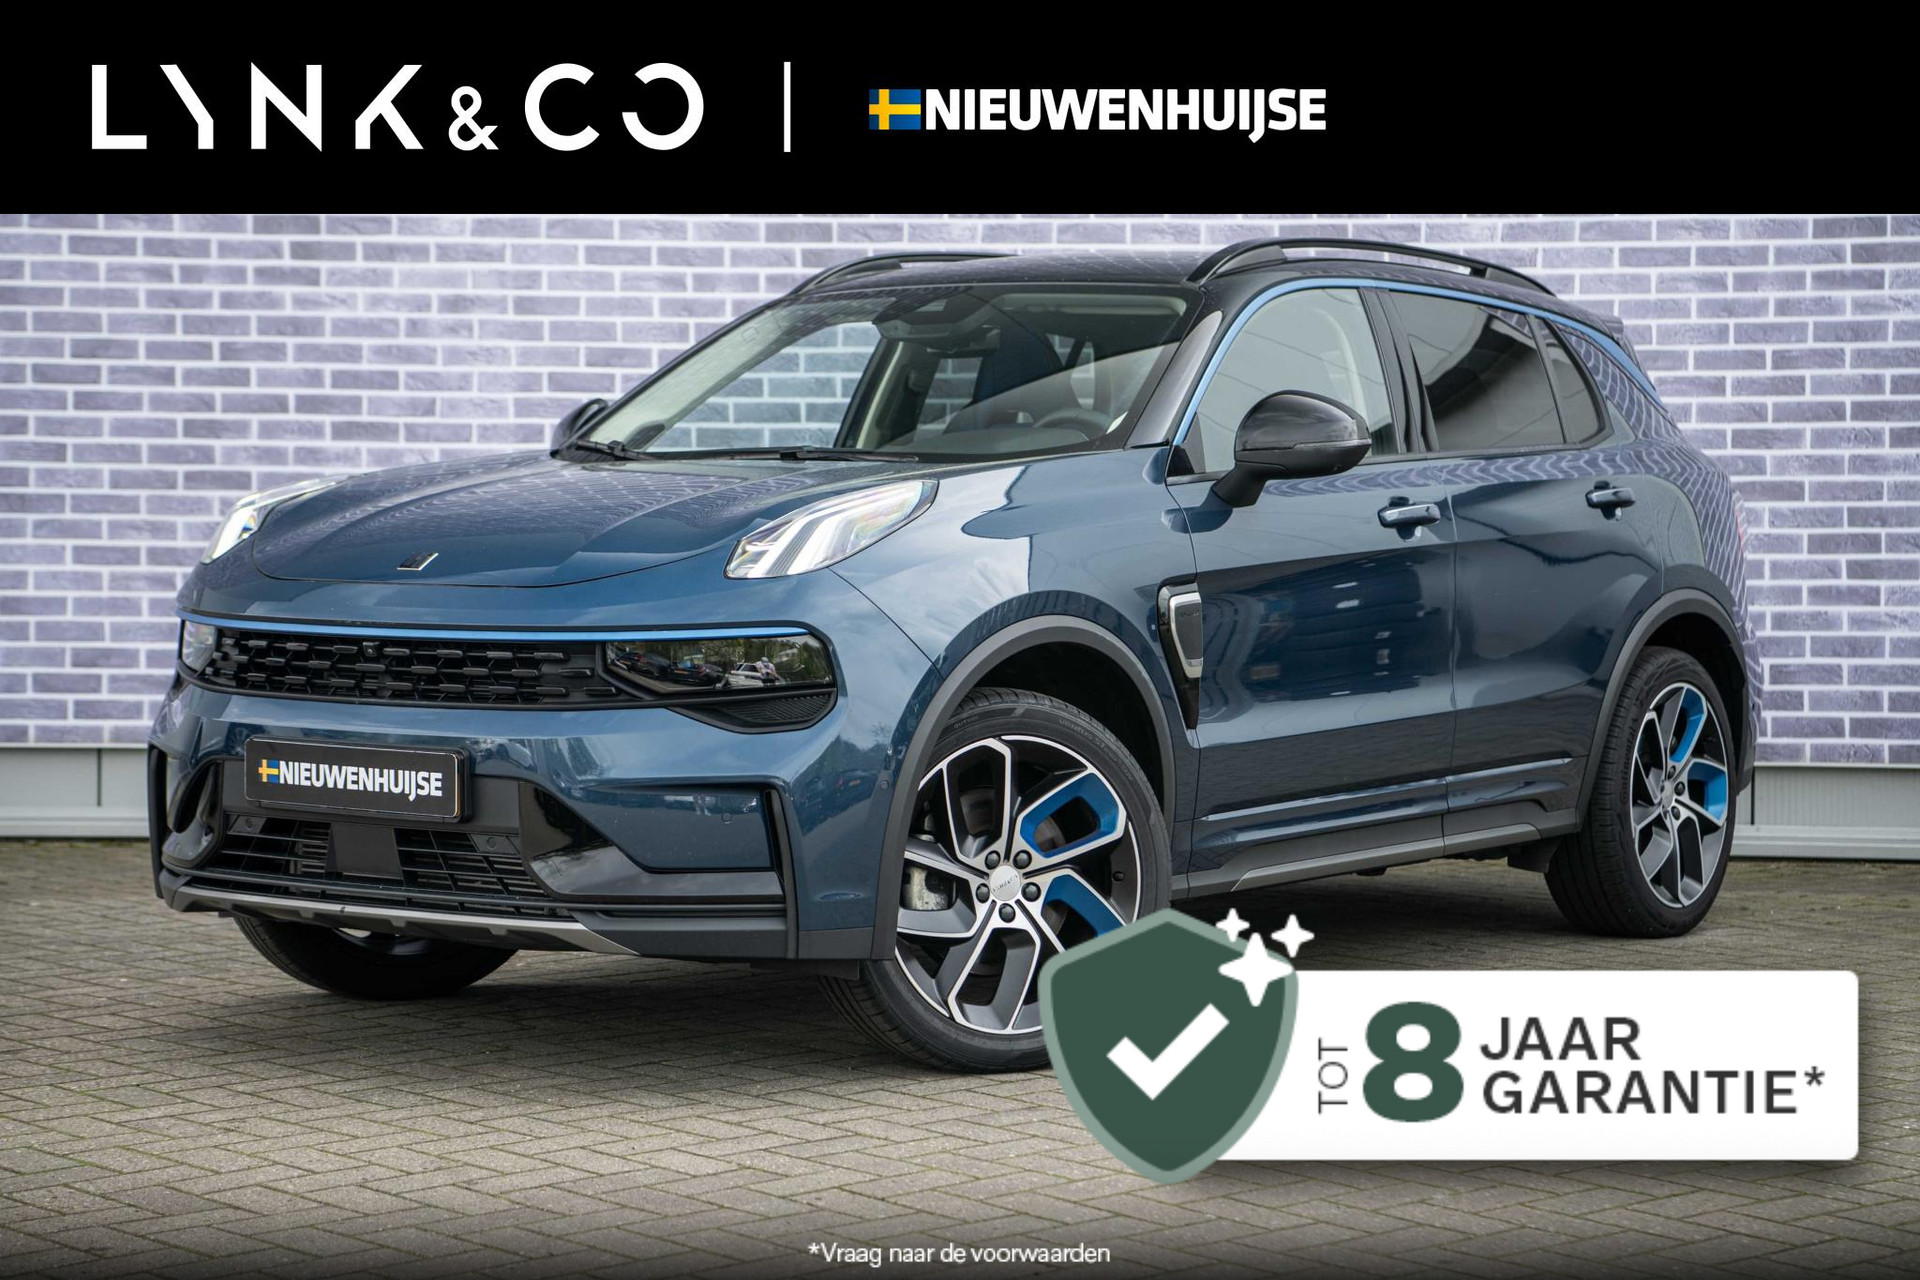 Lynk & Co 01 1.5 | Private lease all in vanaf €489,- p/m | 360 Camera | Panoramadak | Parkeercamera | Parkeersensoren voor + achter | Adaptive cruise control |